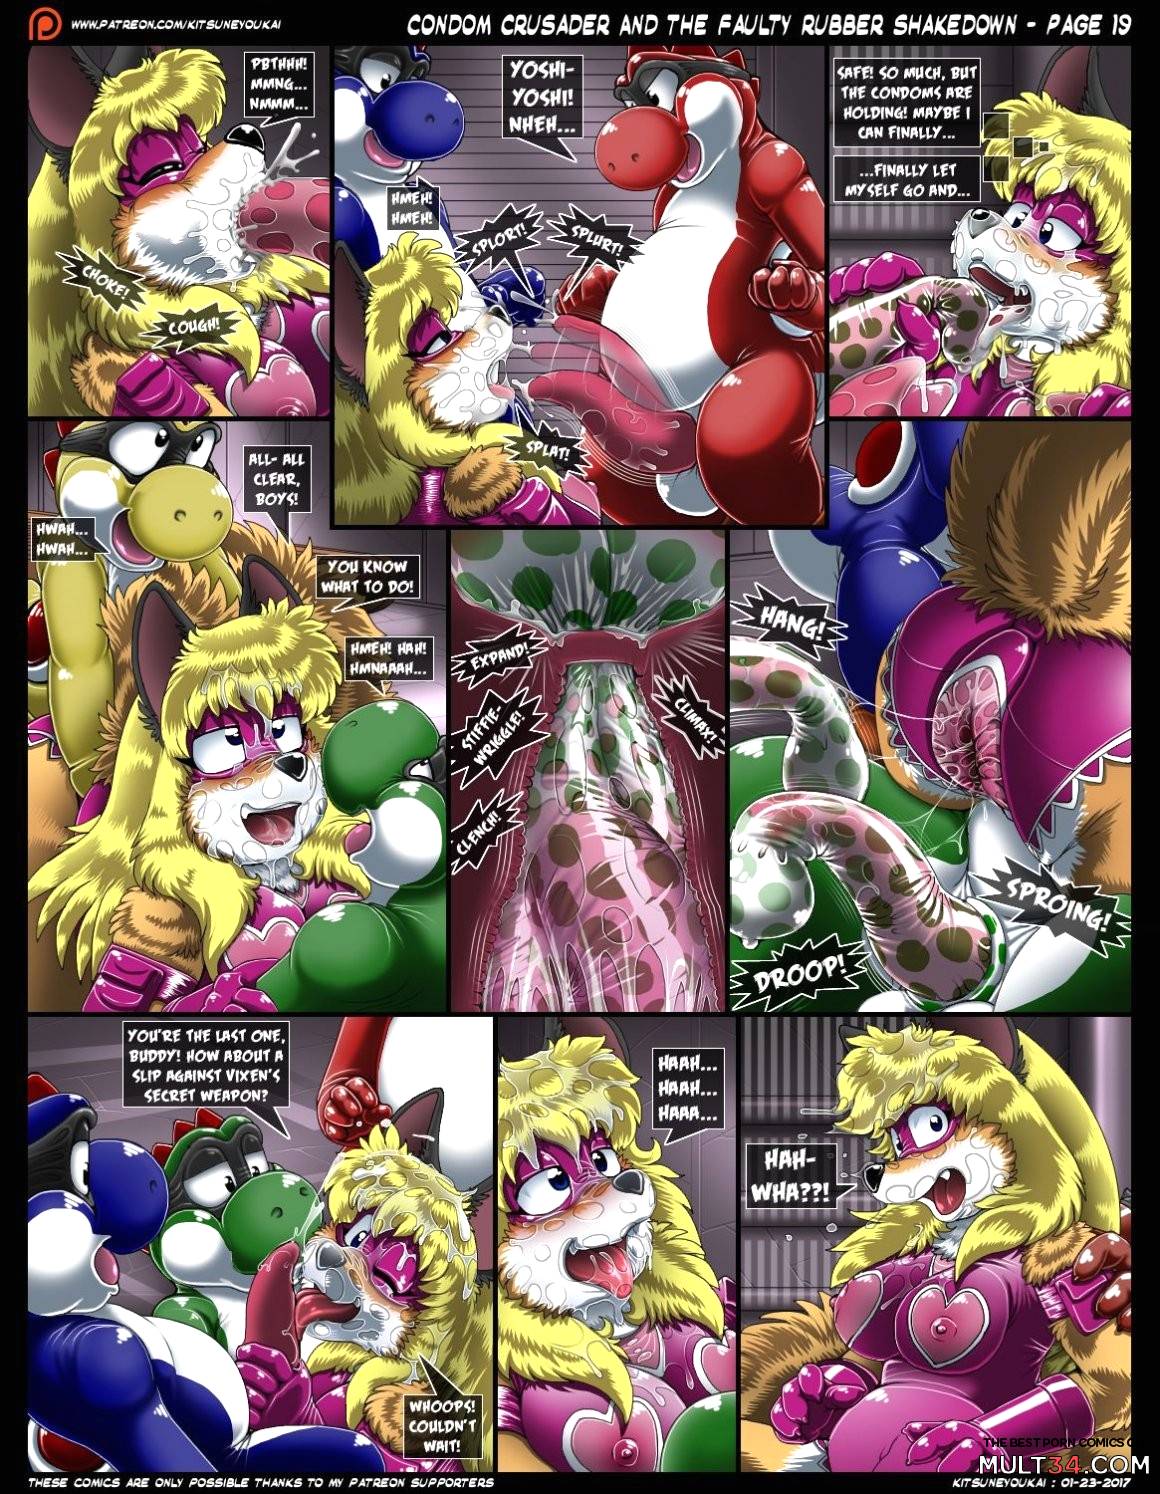 Condom Crusader And The Faulty Rubber Shakedown page 20